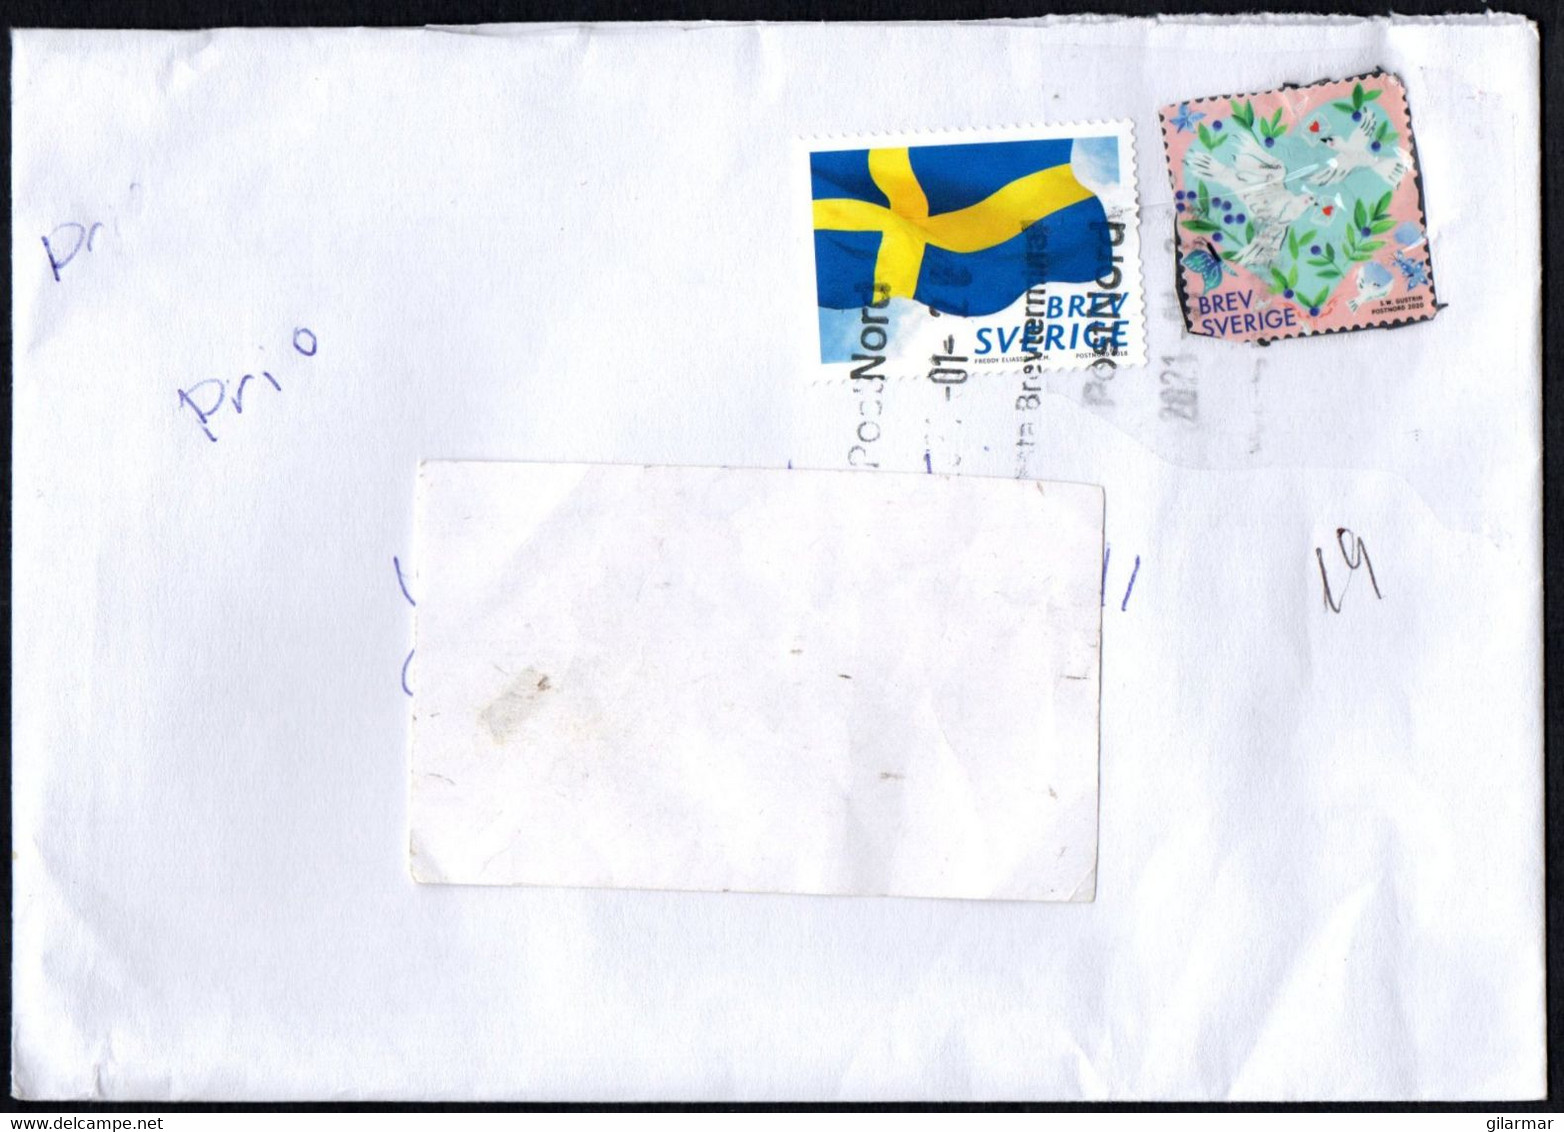 SWEDEN 2021 - MAILED ENVELOPE - SWEDISH FLAG - Covers & Documents